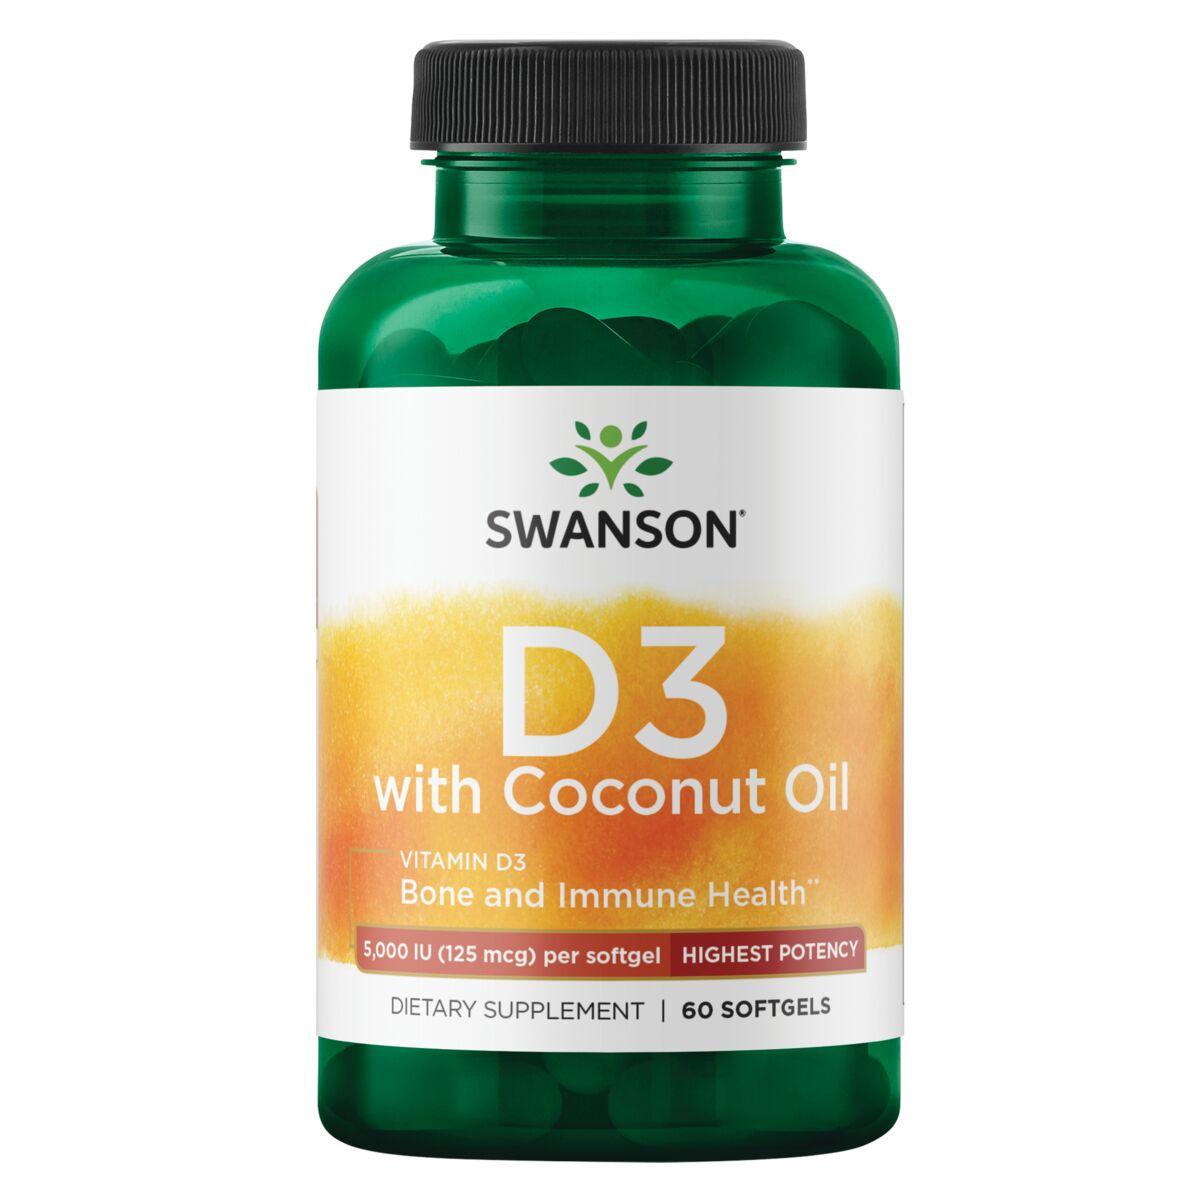 Swanson Ultra Vitamin D3 with Coconut Oil - Highest Potency | 5000 Iu | 60 Soft Gels | Vitamin A